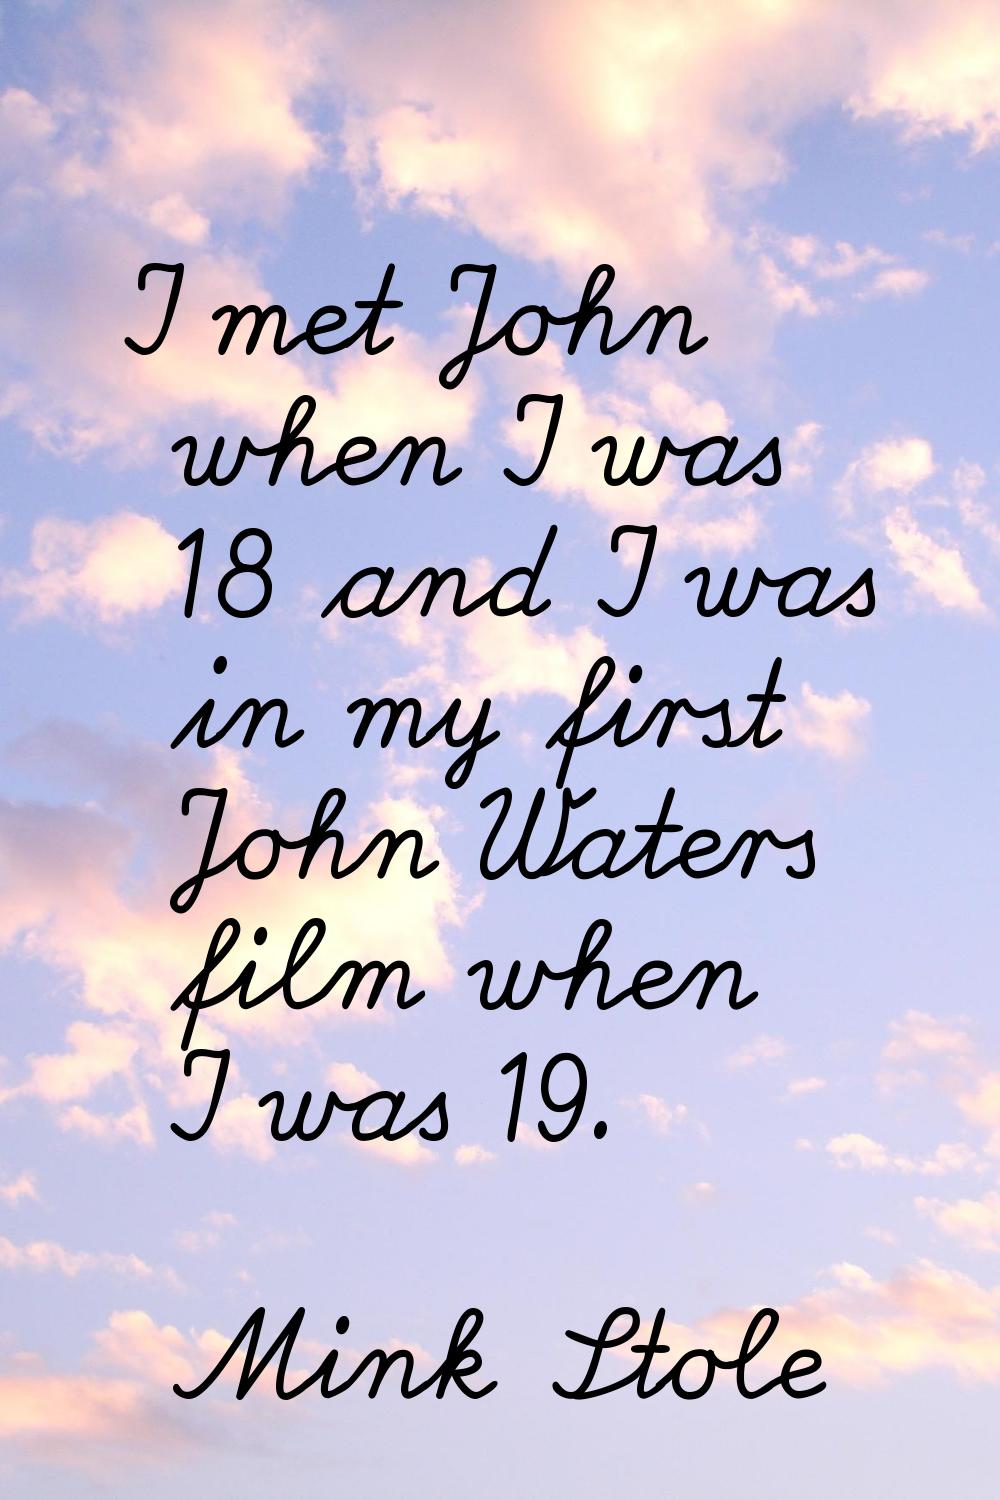 I met John when I was 18 and I was in my first John Waters film when I was 19.